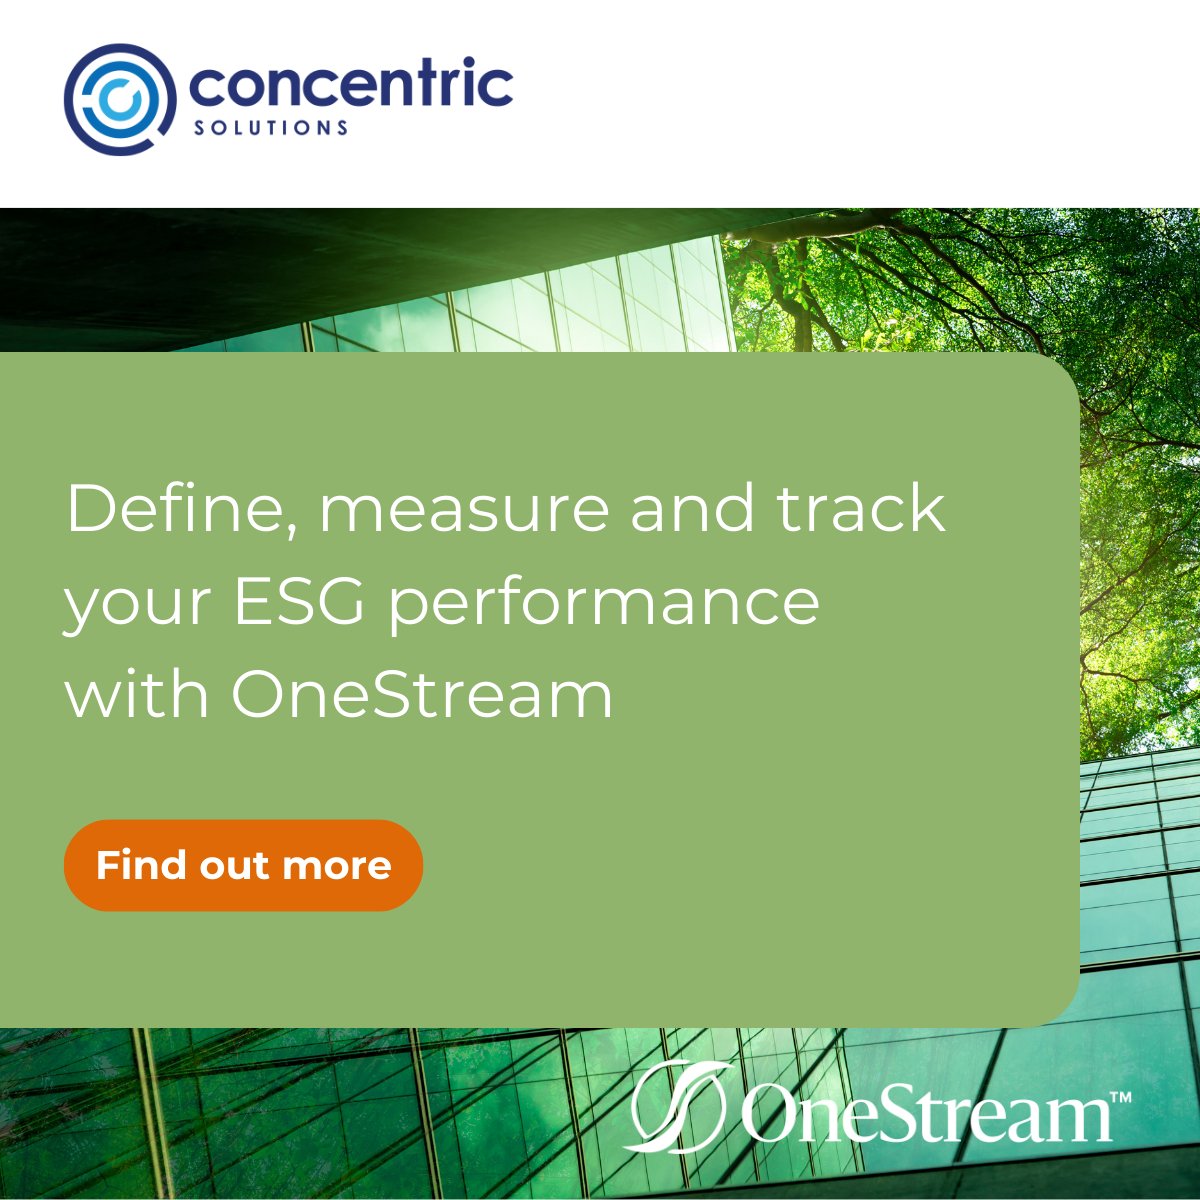 Are you realising the full potential of @OneStreamSoft to help you plan, forecast and confidently report on #ESG metrics and drivers? Contact us to explore how the platform can be extended >> concentricsolutions.com/solutions/esg-… #carbonemissions #socialimpact #governance